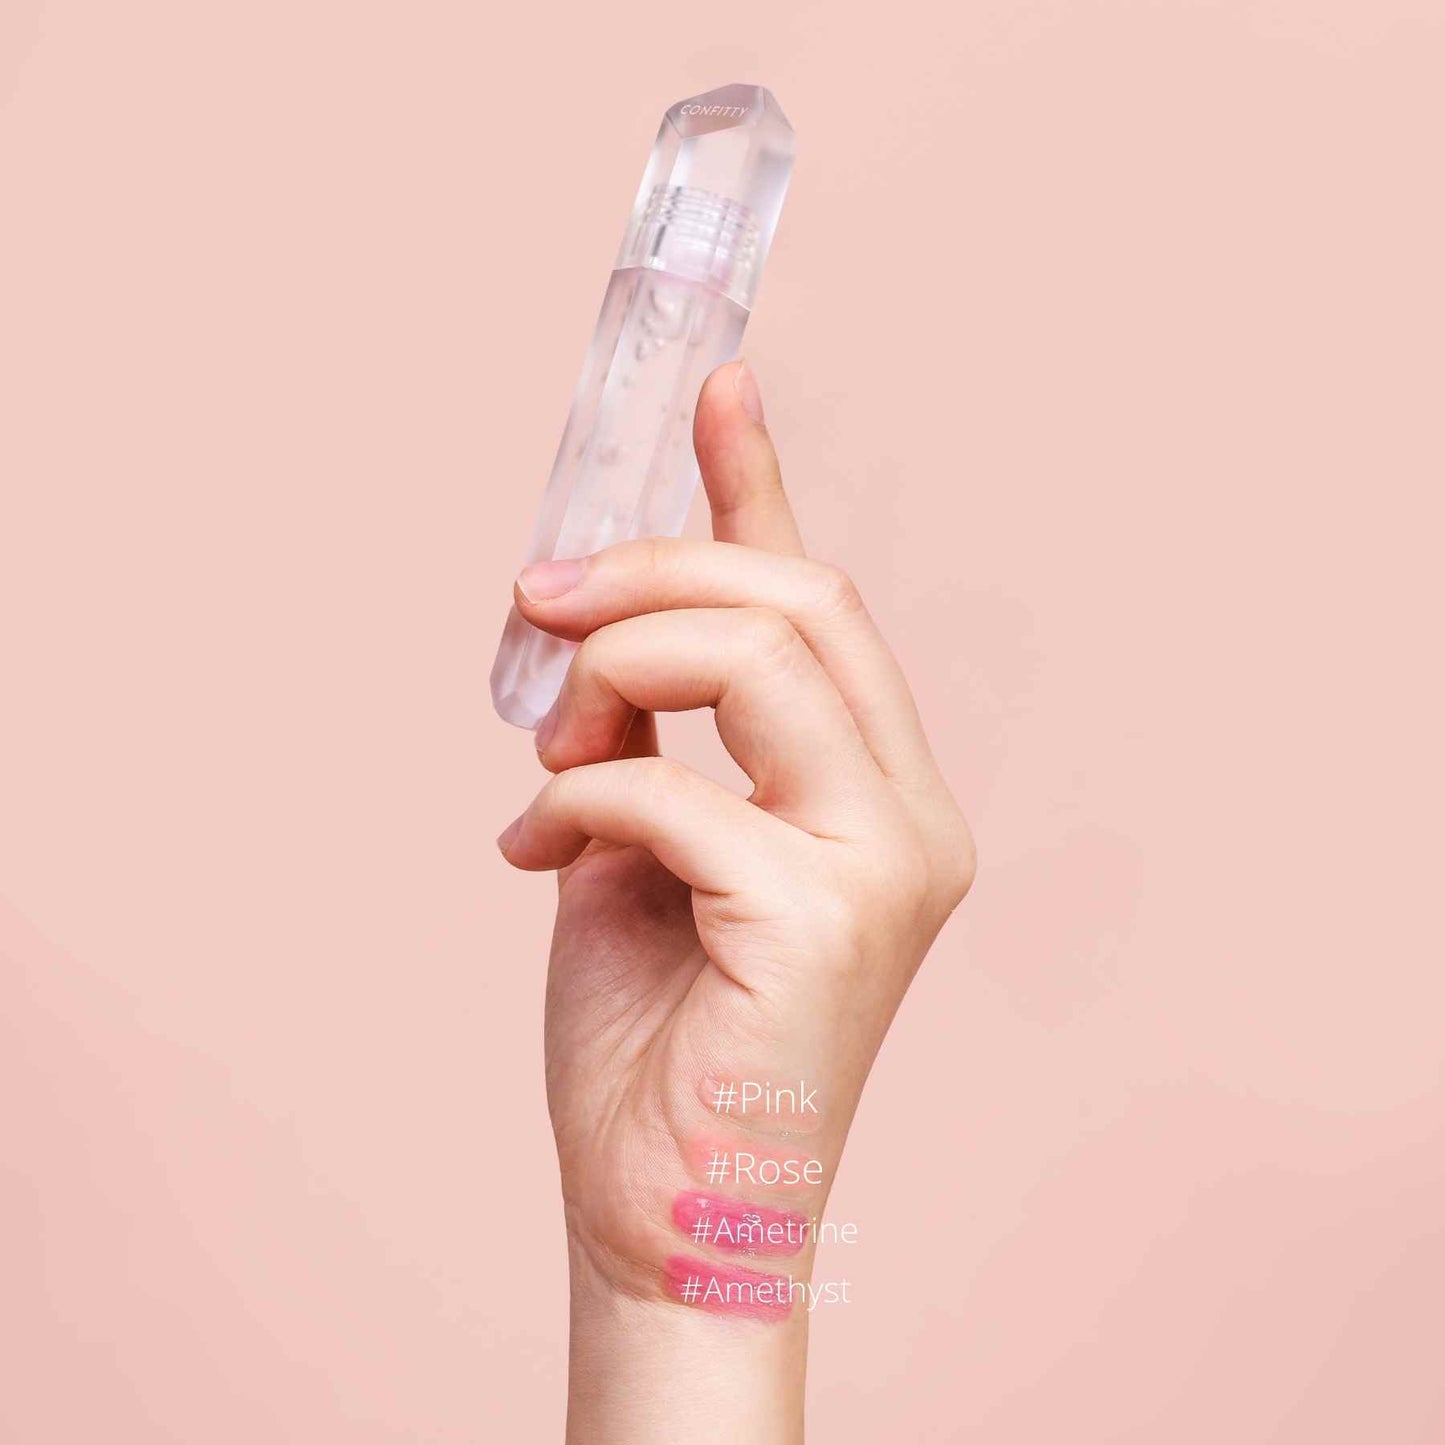 Crystal Clear Magic Lipgloss + Silky Skin Two Way Cake + Daily Refresh Face Mist